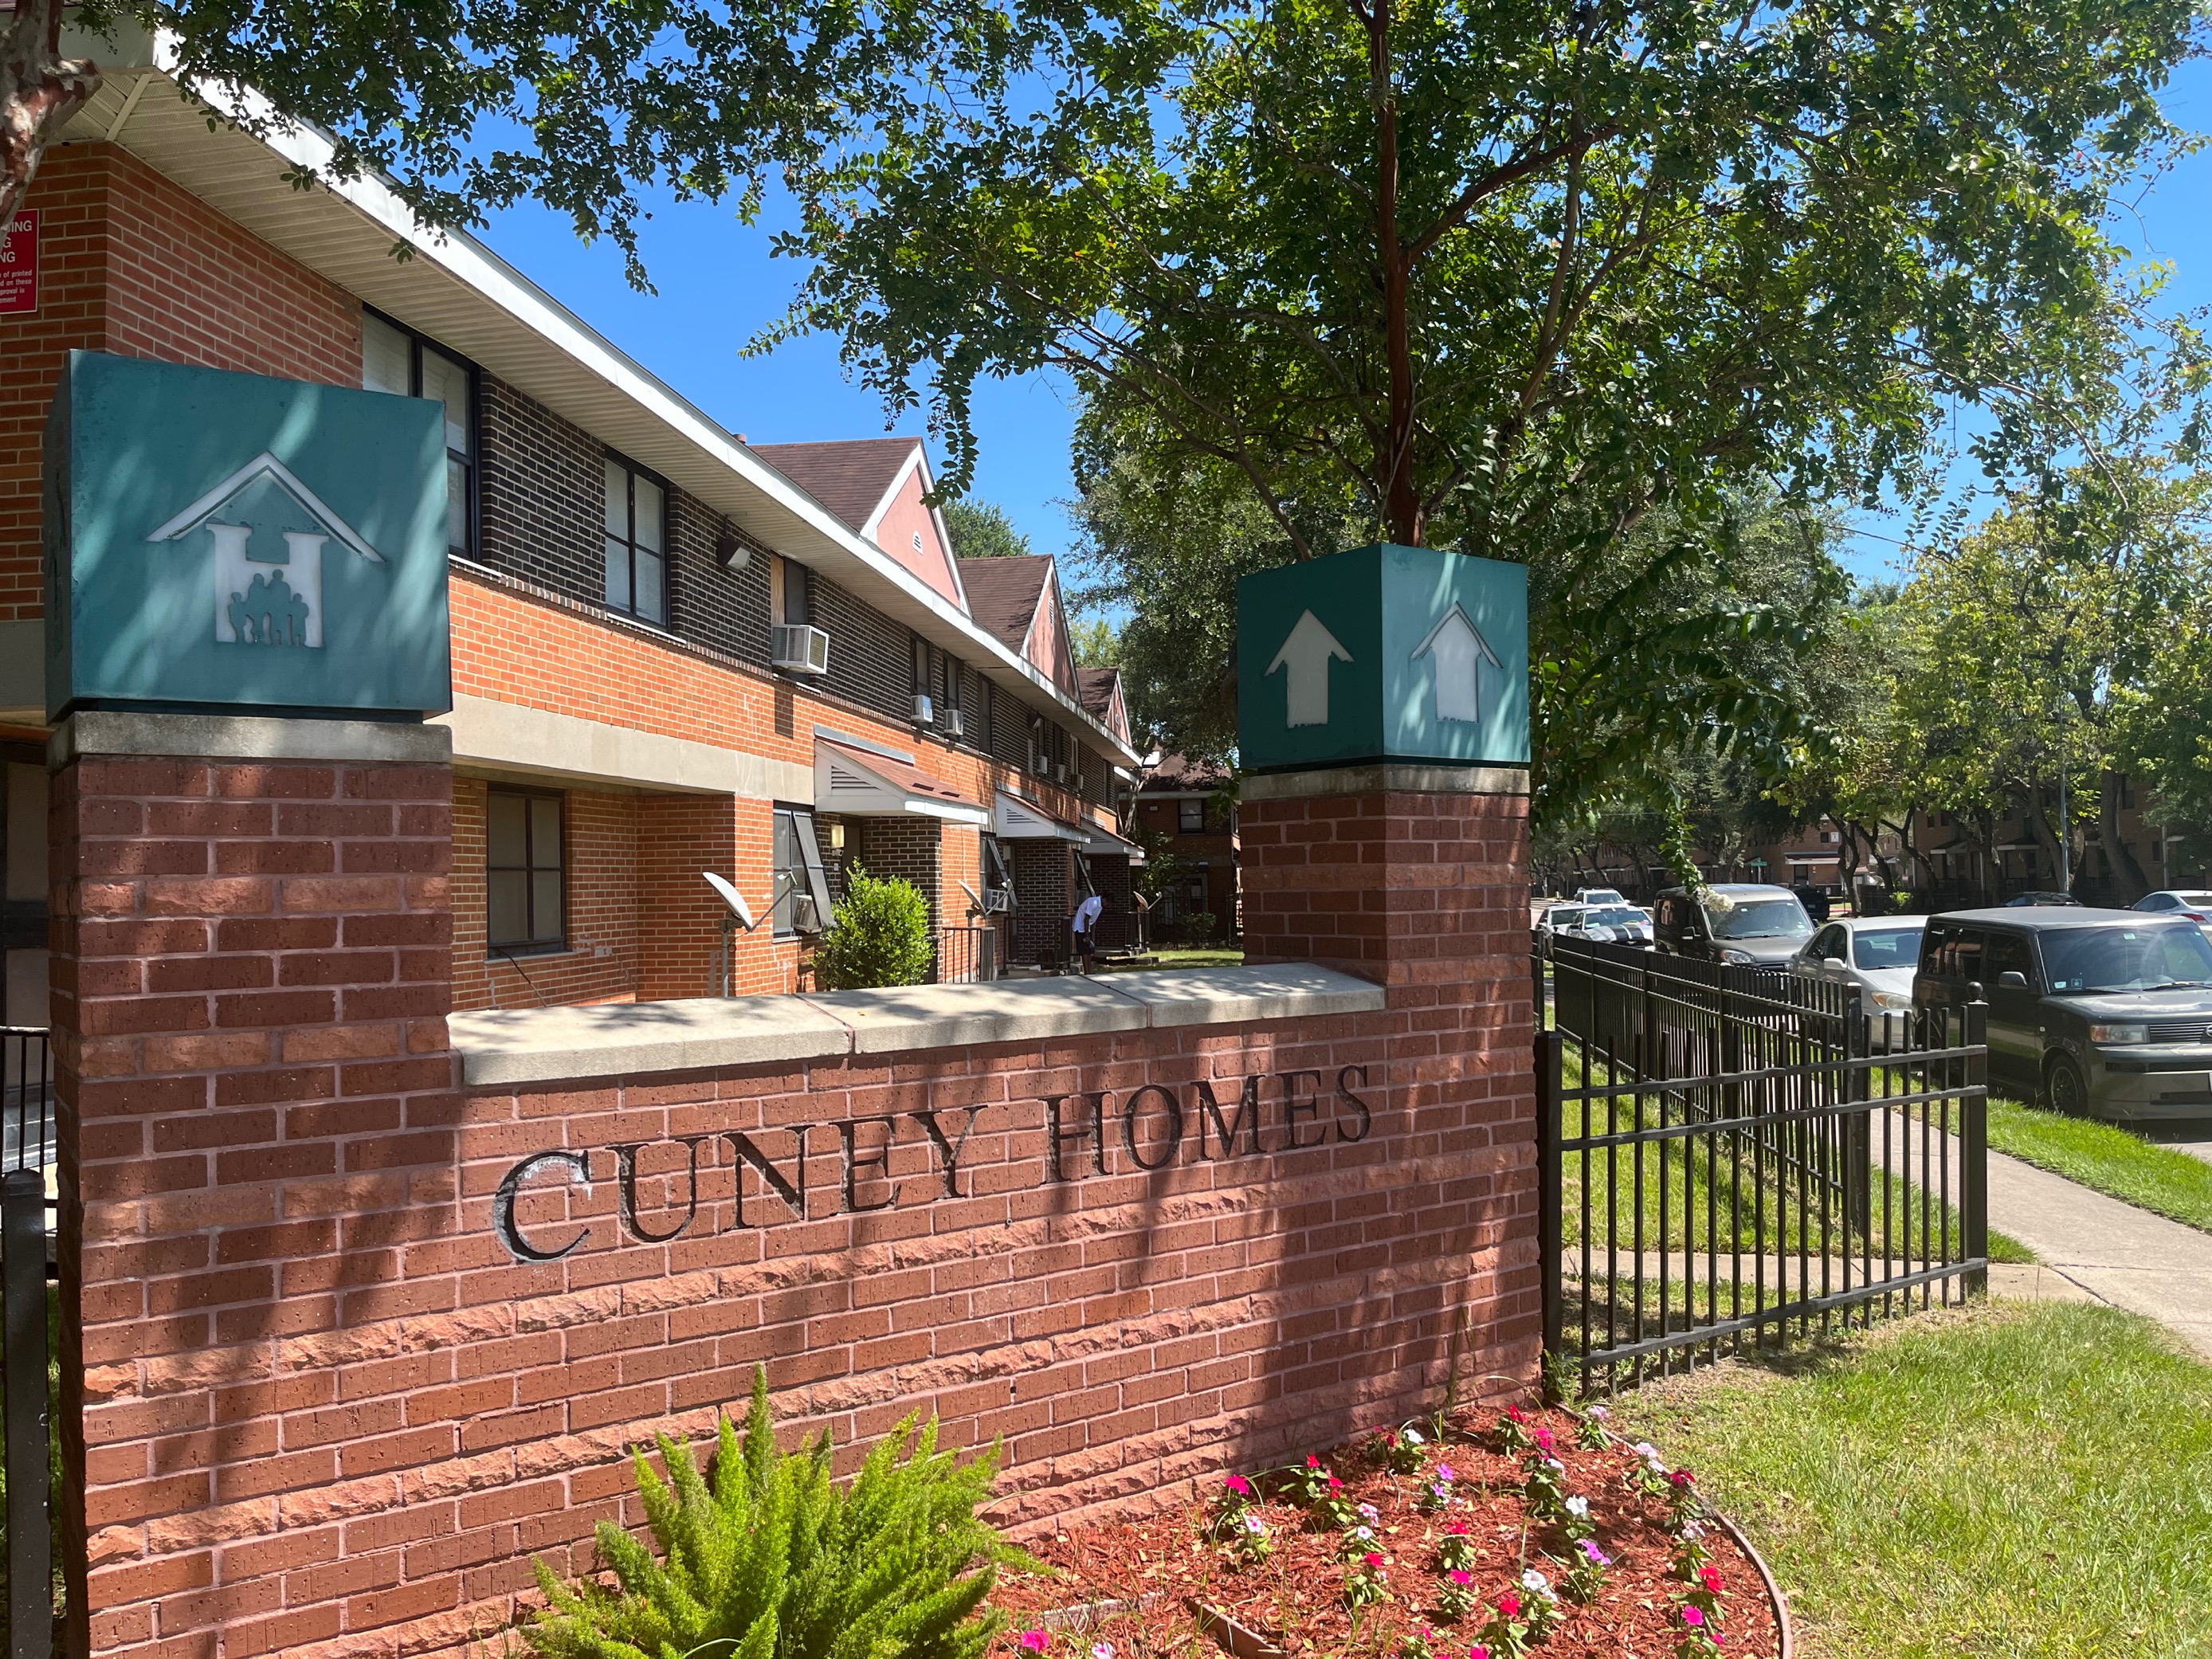 Cuney Homes was awarded a $450,000 grant.